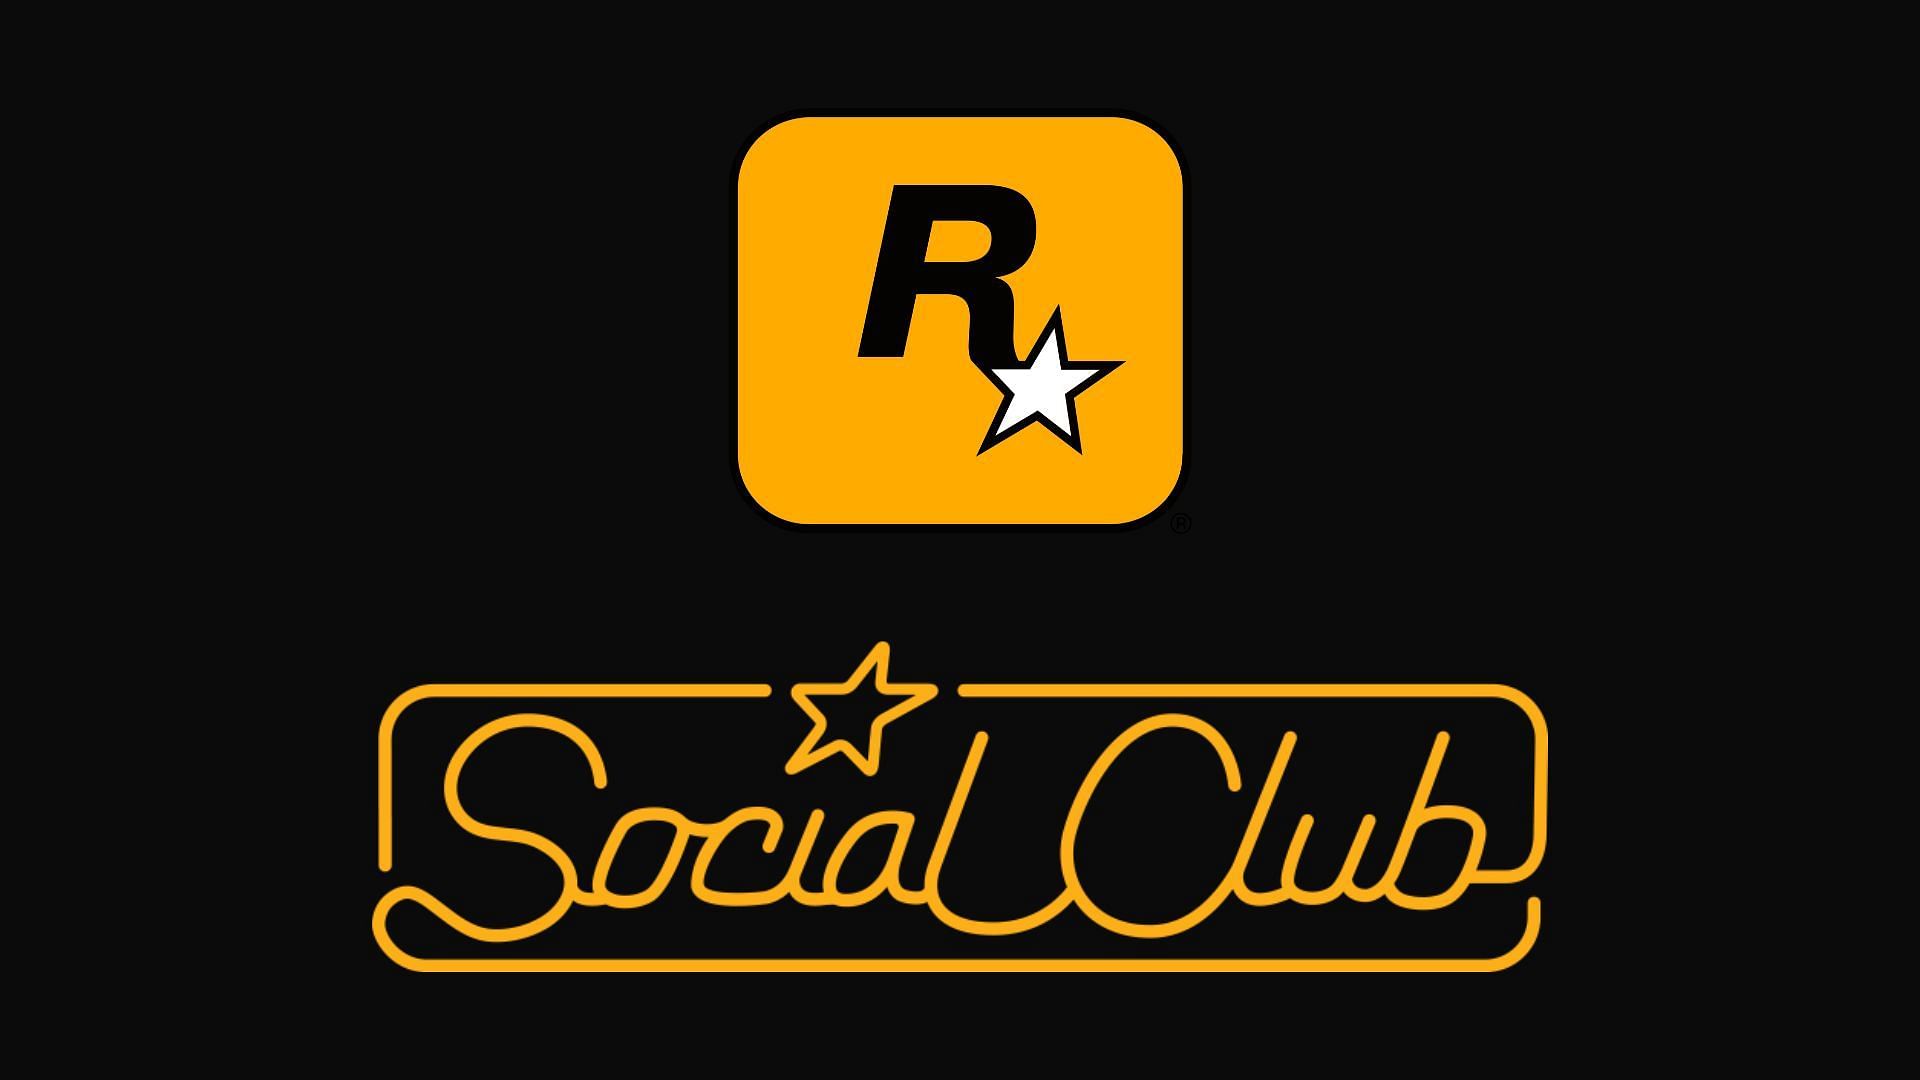 Rockstar Social Club may have been compromised according to recent reports (Image via Rockstar Games)